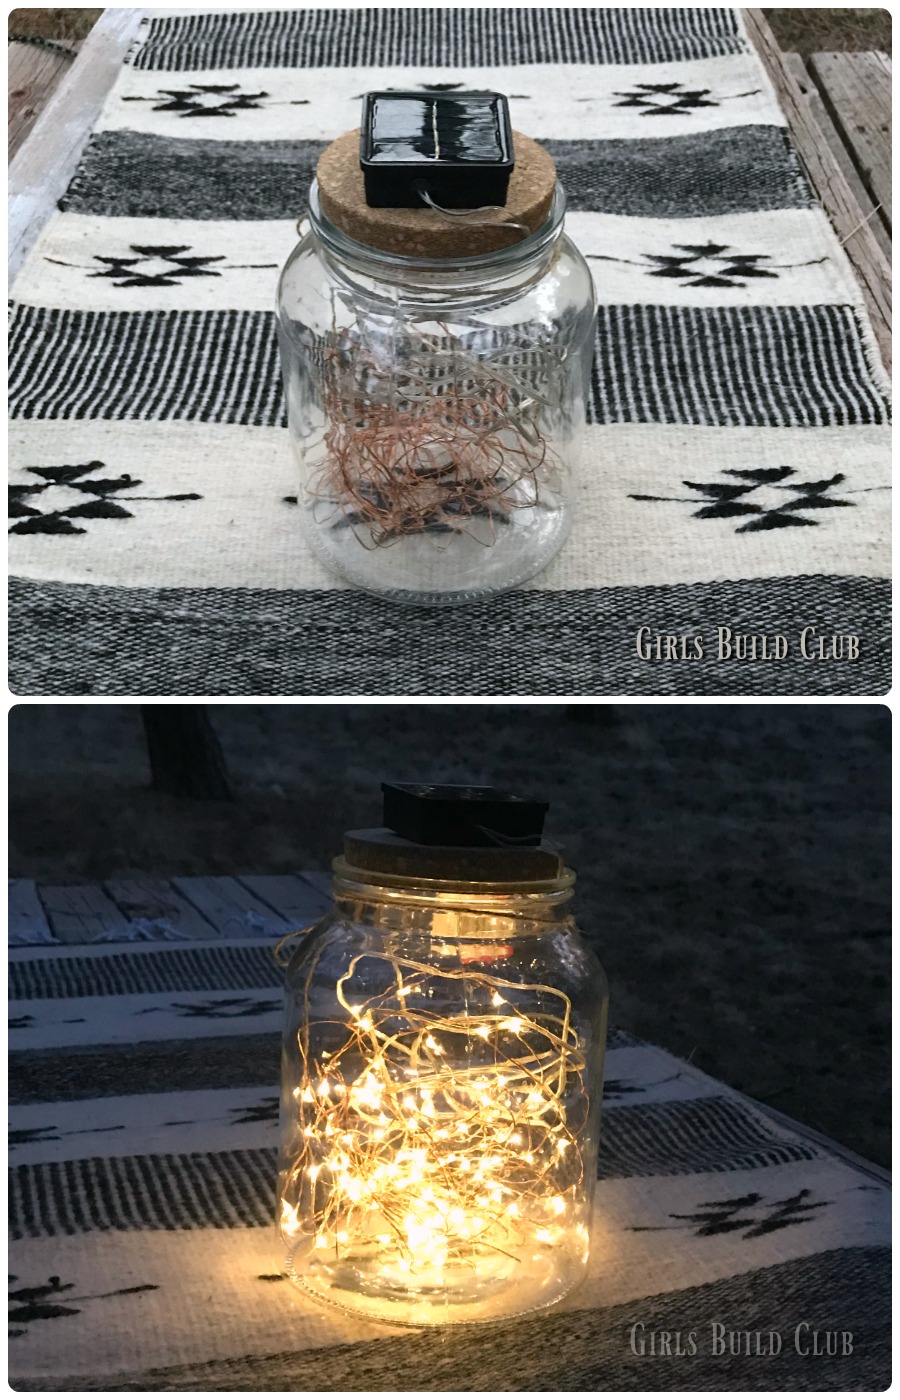 Learn how to make a STAR JAR with a glass jar and solar fairy lights! It's sooooo easy. And looks so pretty on those summer nights outside. Makes a great table centerpiece for those outdoor dinners and bbq's when you're entertaining outside. #solarlights #fairylights #diy #masonjar